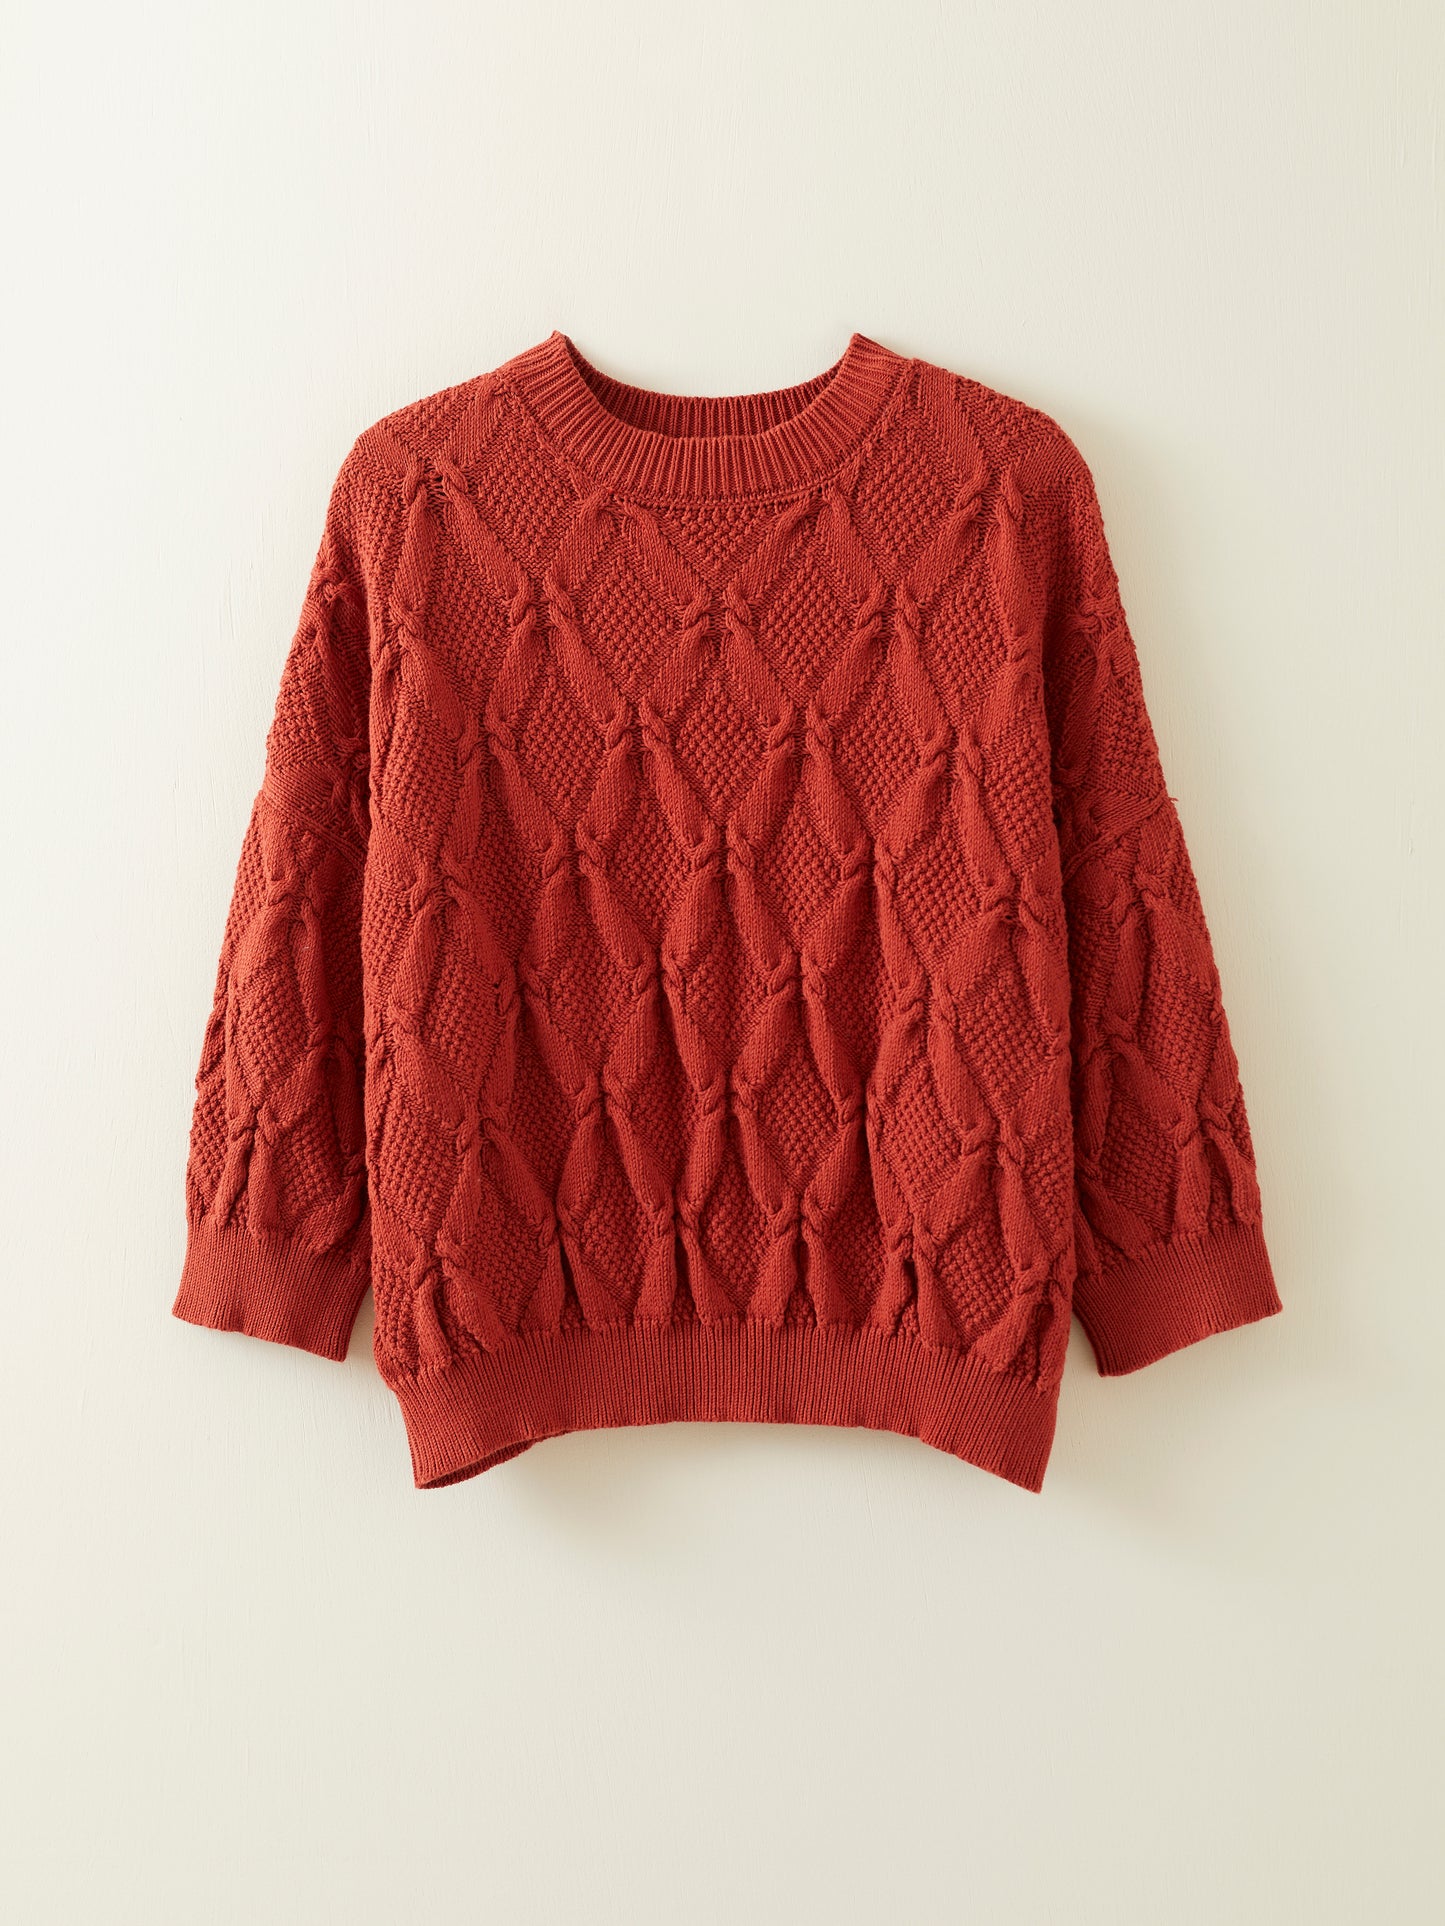 Organic Cotton Cable Sweater in Rich Red